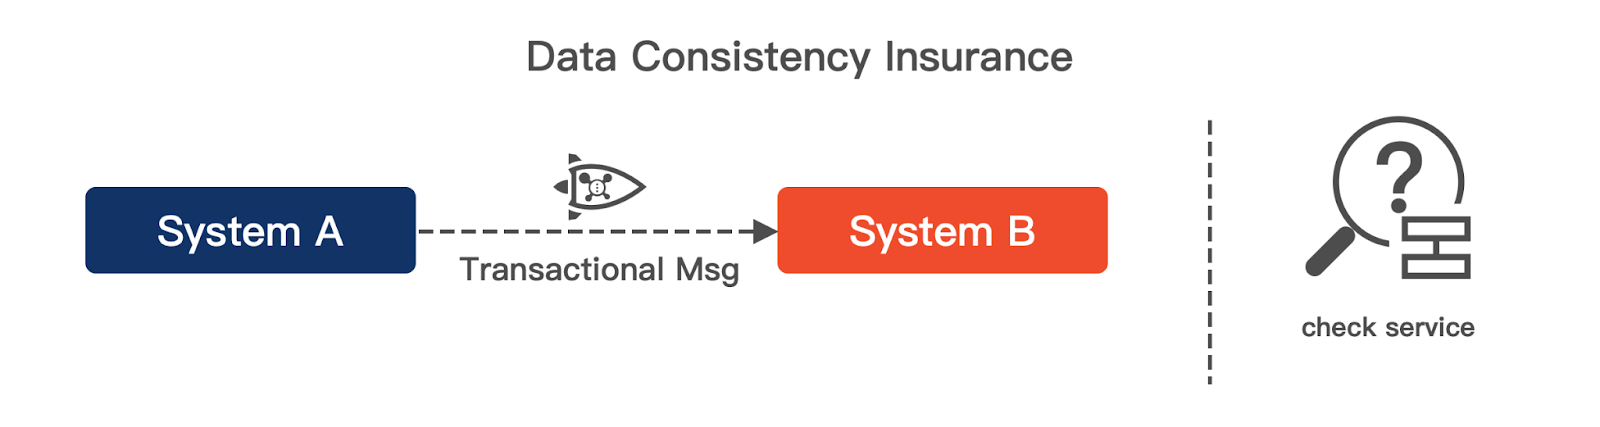 Fig2. Data Consistency Insurance